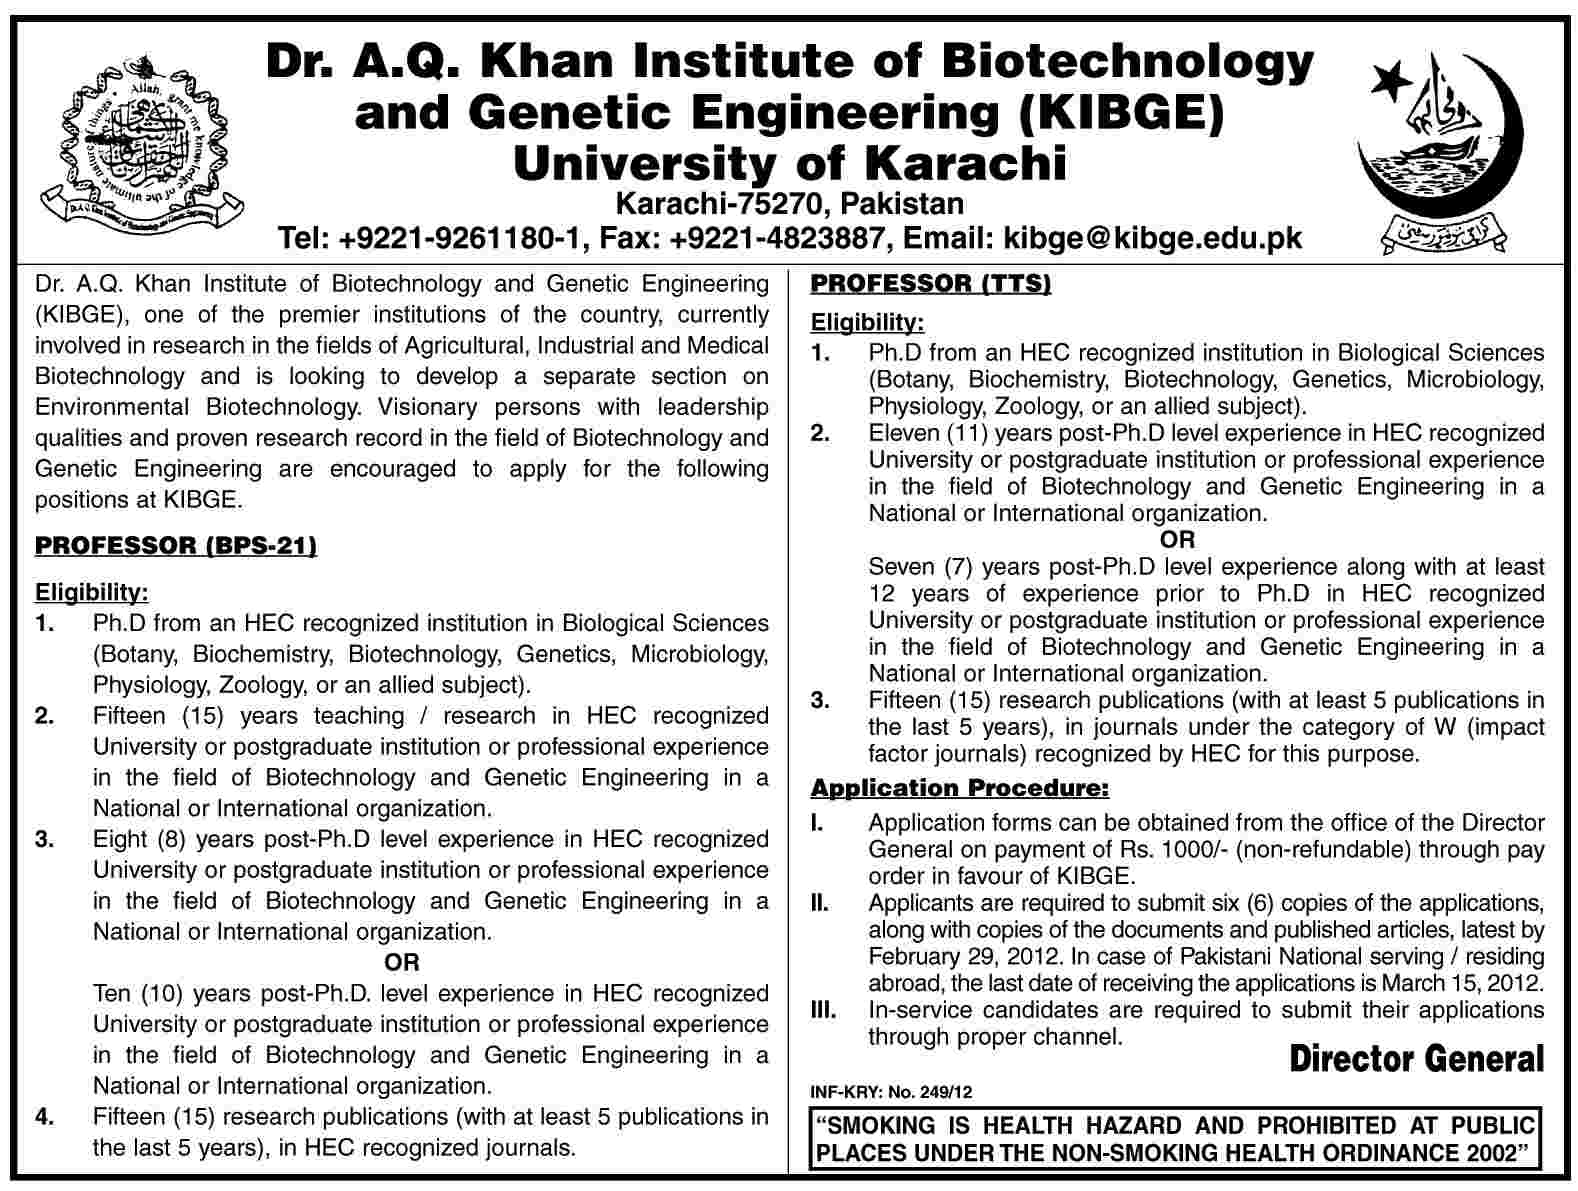 Dr. A.Q Khan Institute of Biotechnology and Genetic Engineering (KIBGE), University of Karachi Jobs Opportunity